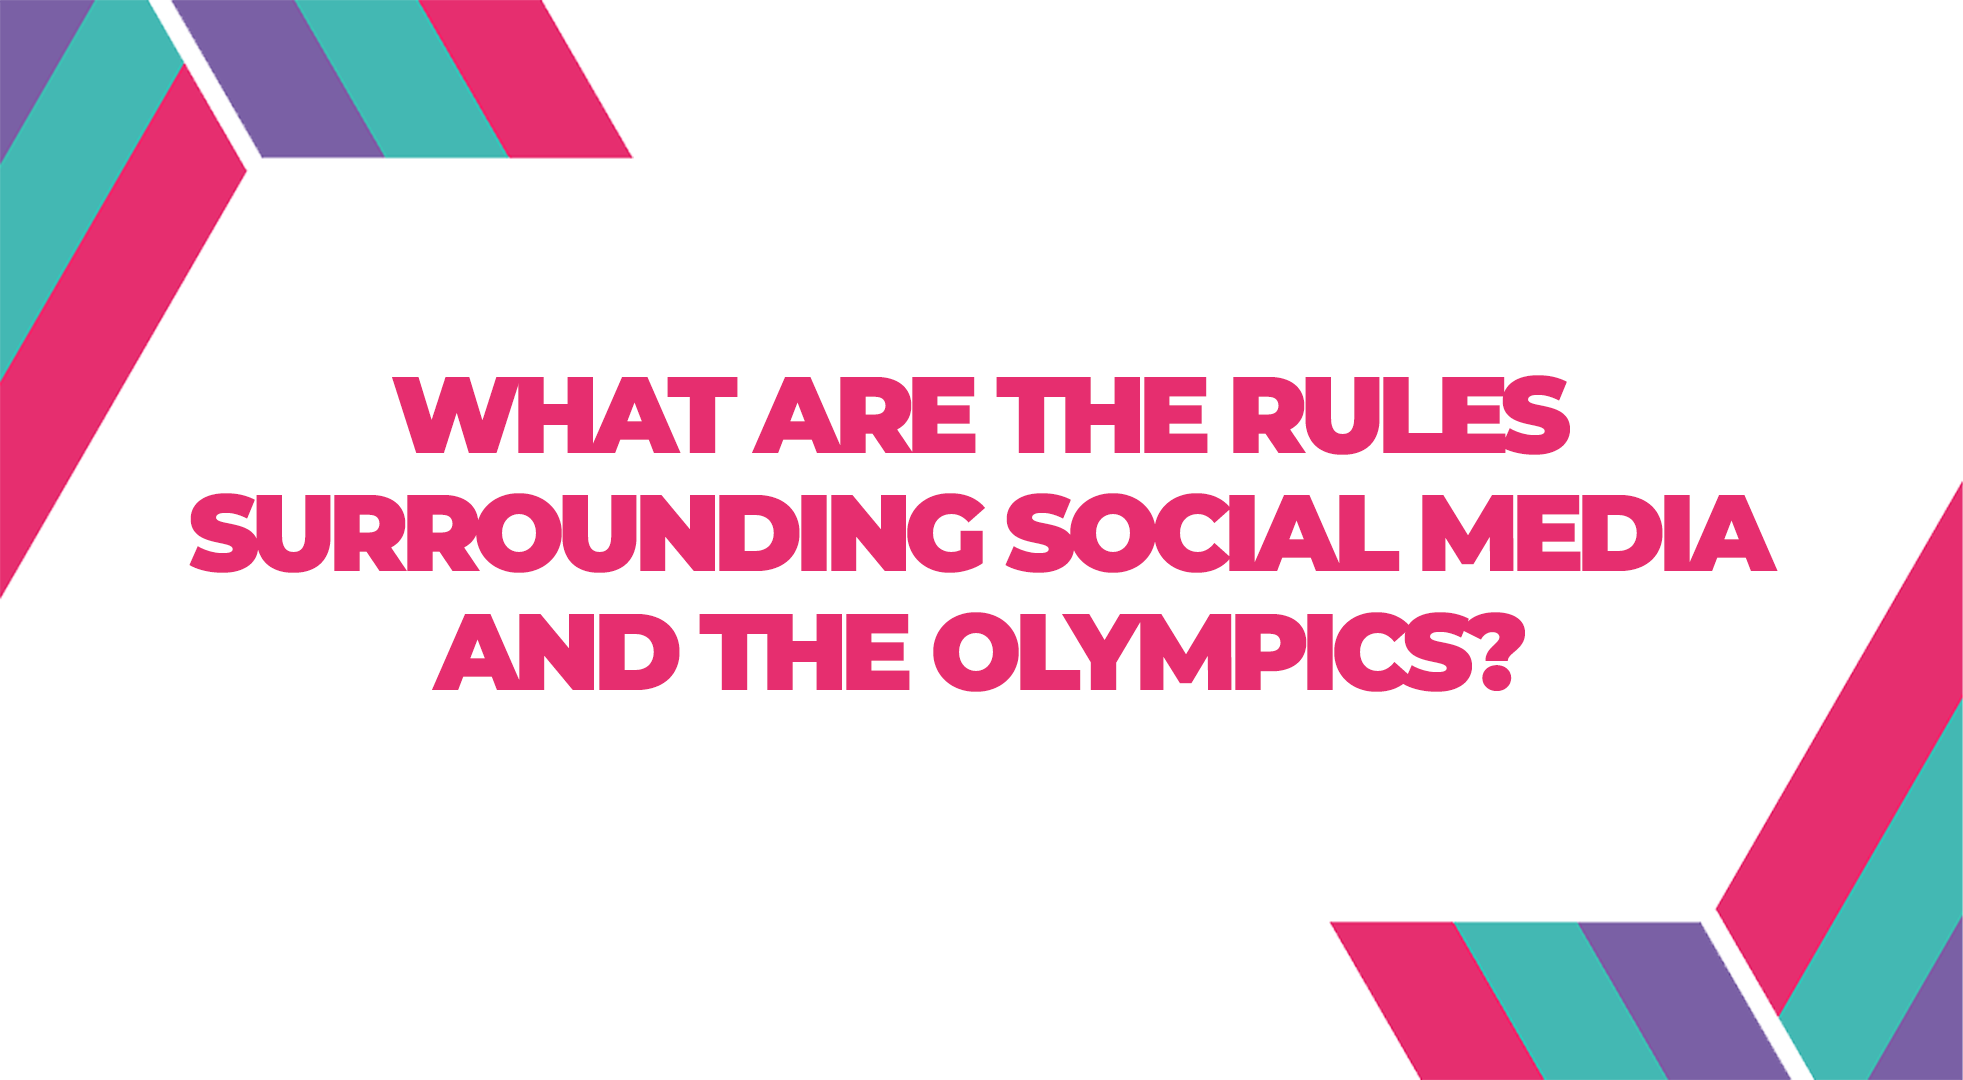 What are the rules surrounding social media and the Olympics?